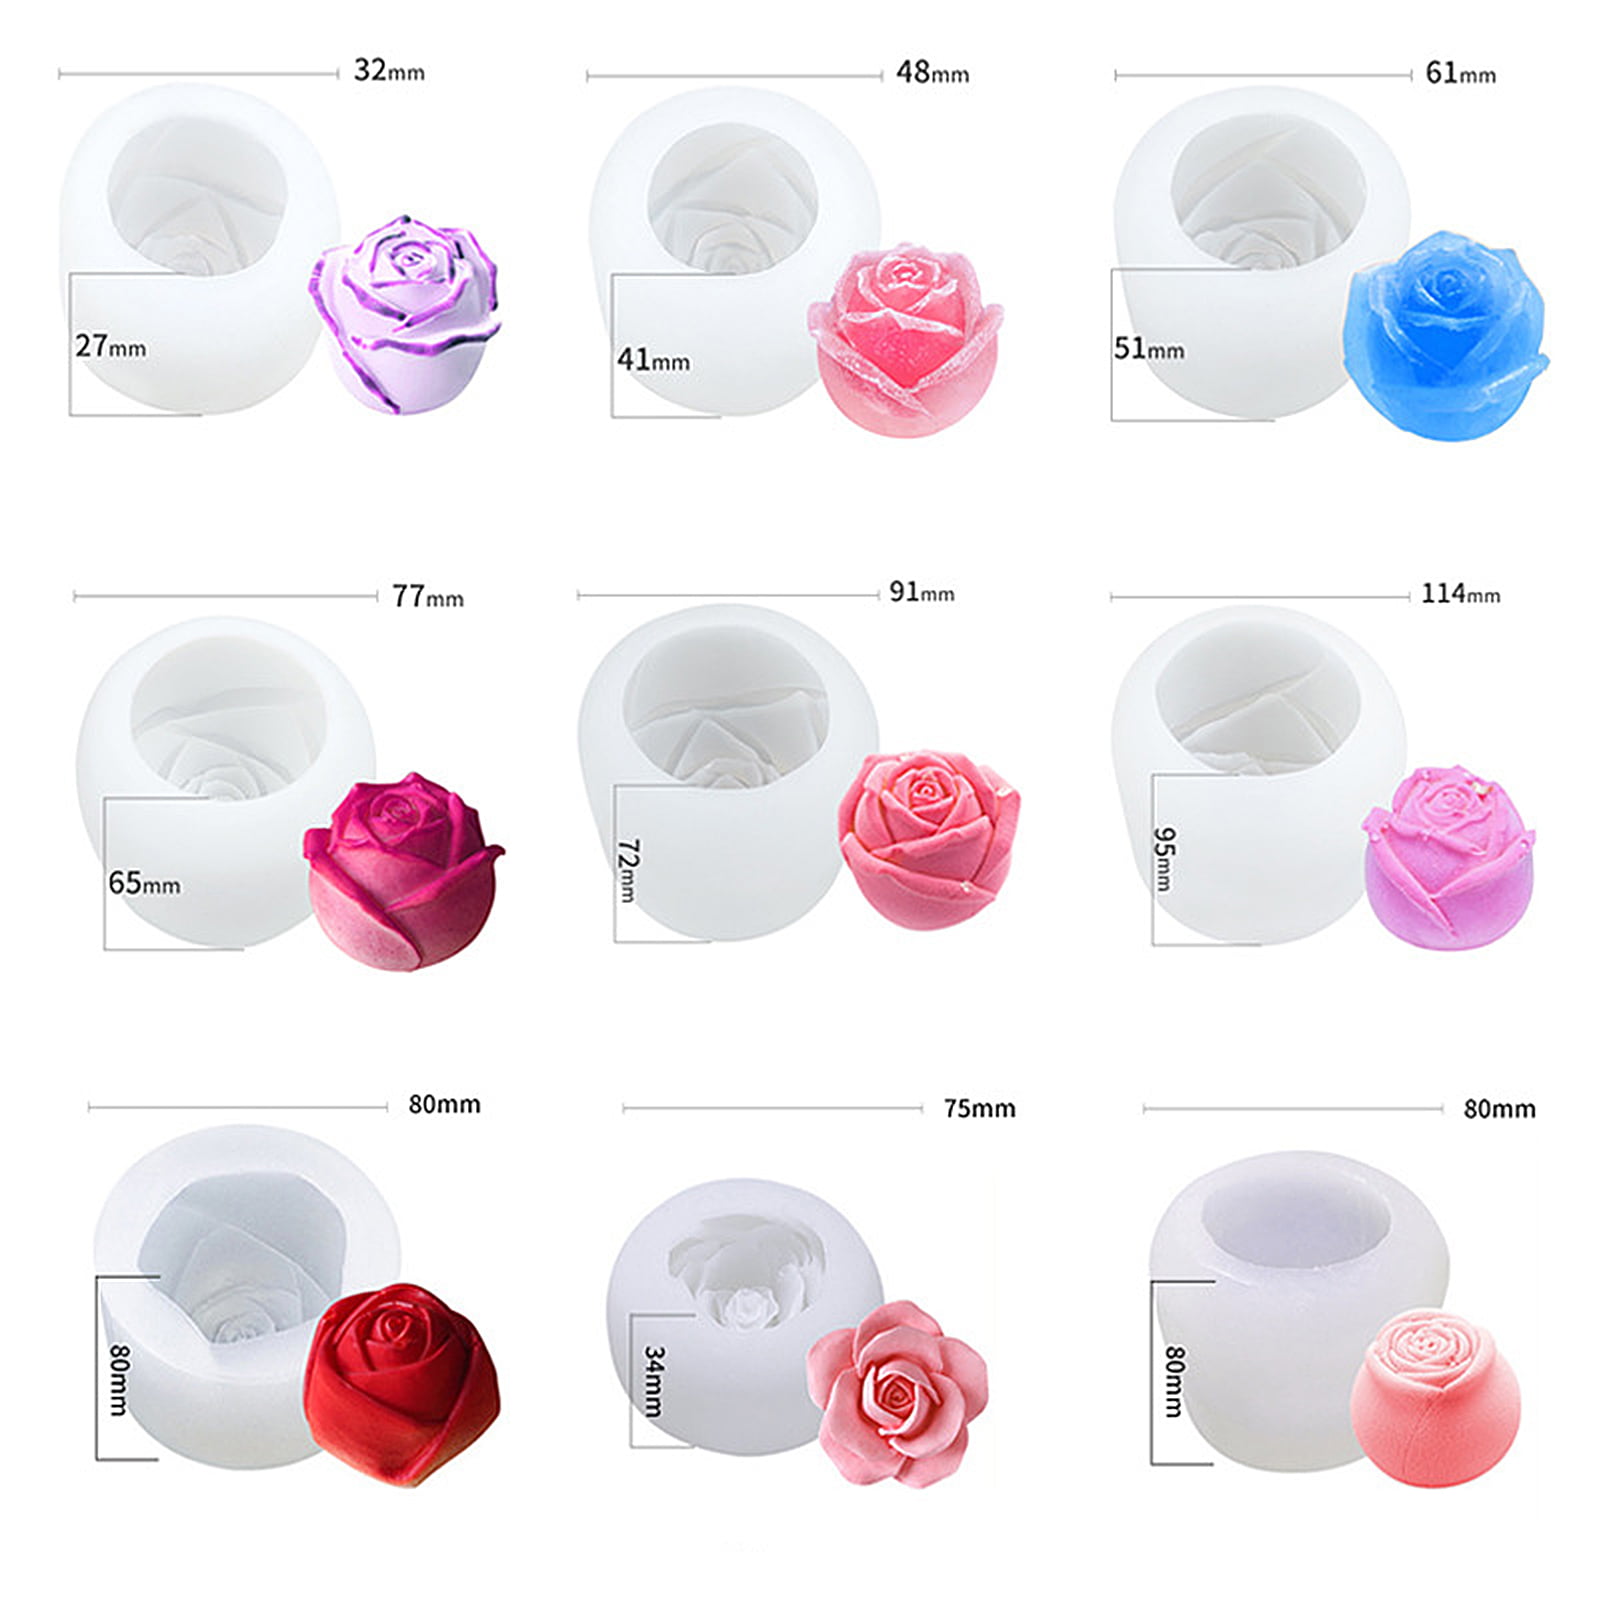 Wehous 6pcs 3D Flower Fondant Molds Set, Rose Silicone Molds for Candle Soap Making, Handmade Cake Dessert Decoration Chocolate Cupcake Candy Ice Mold, Resi